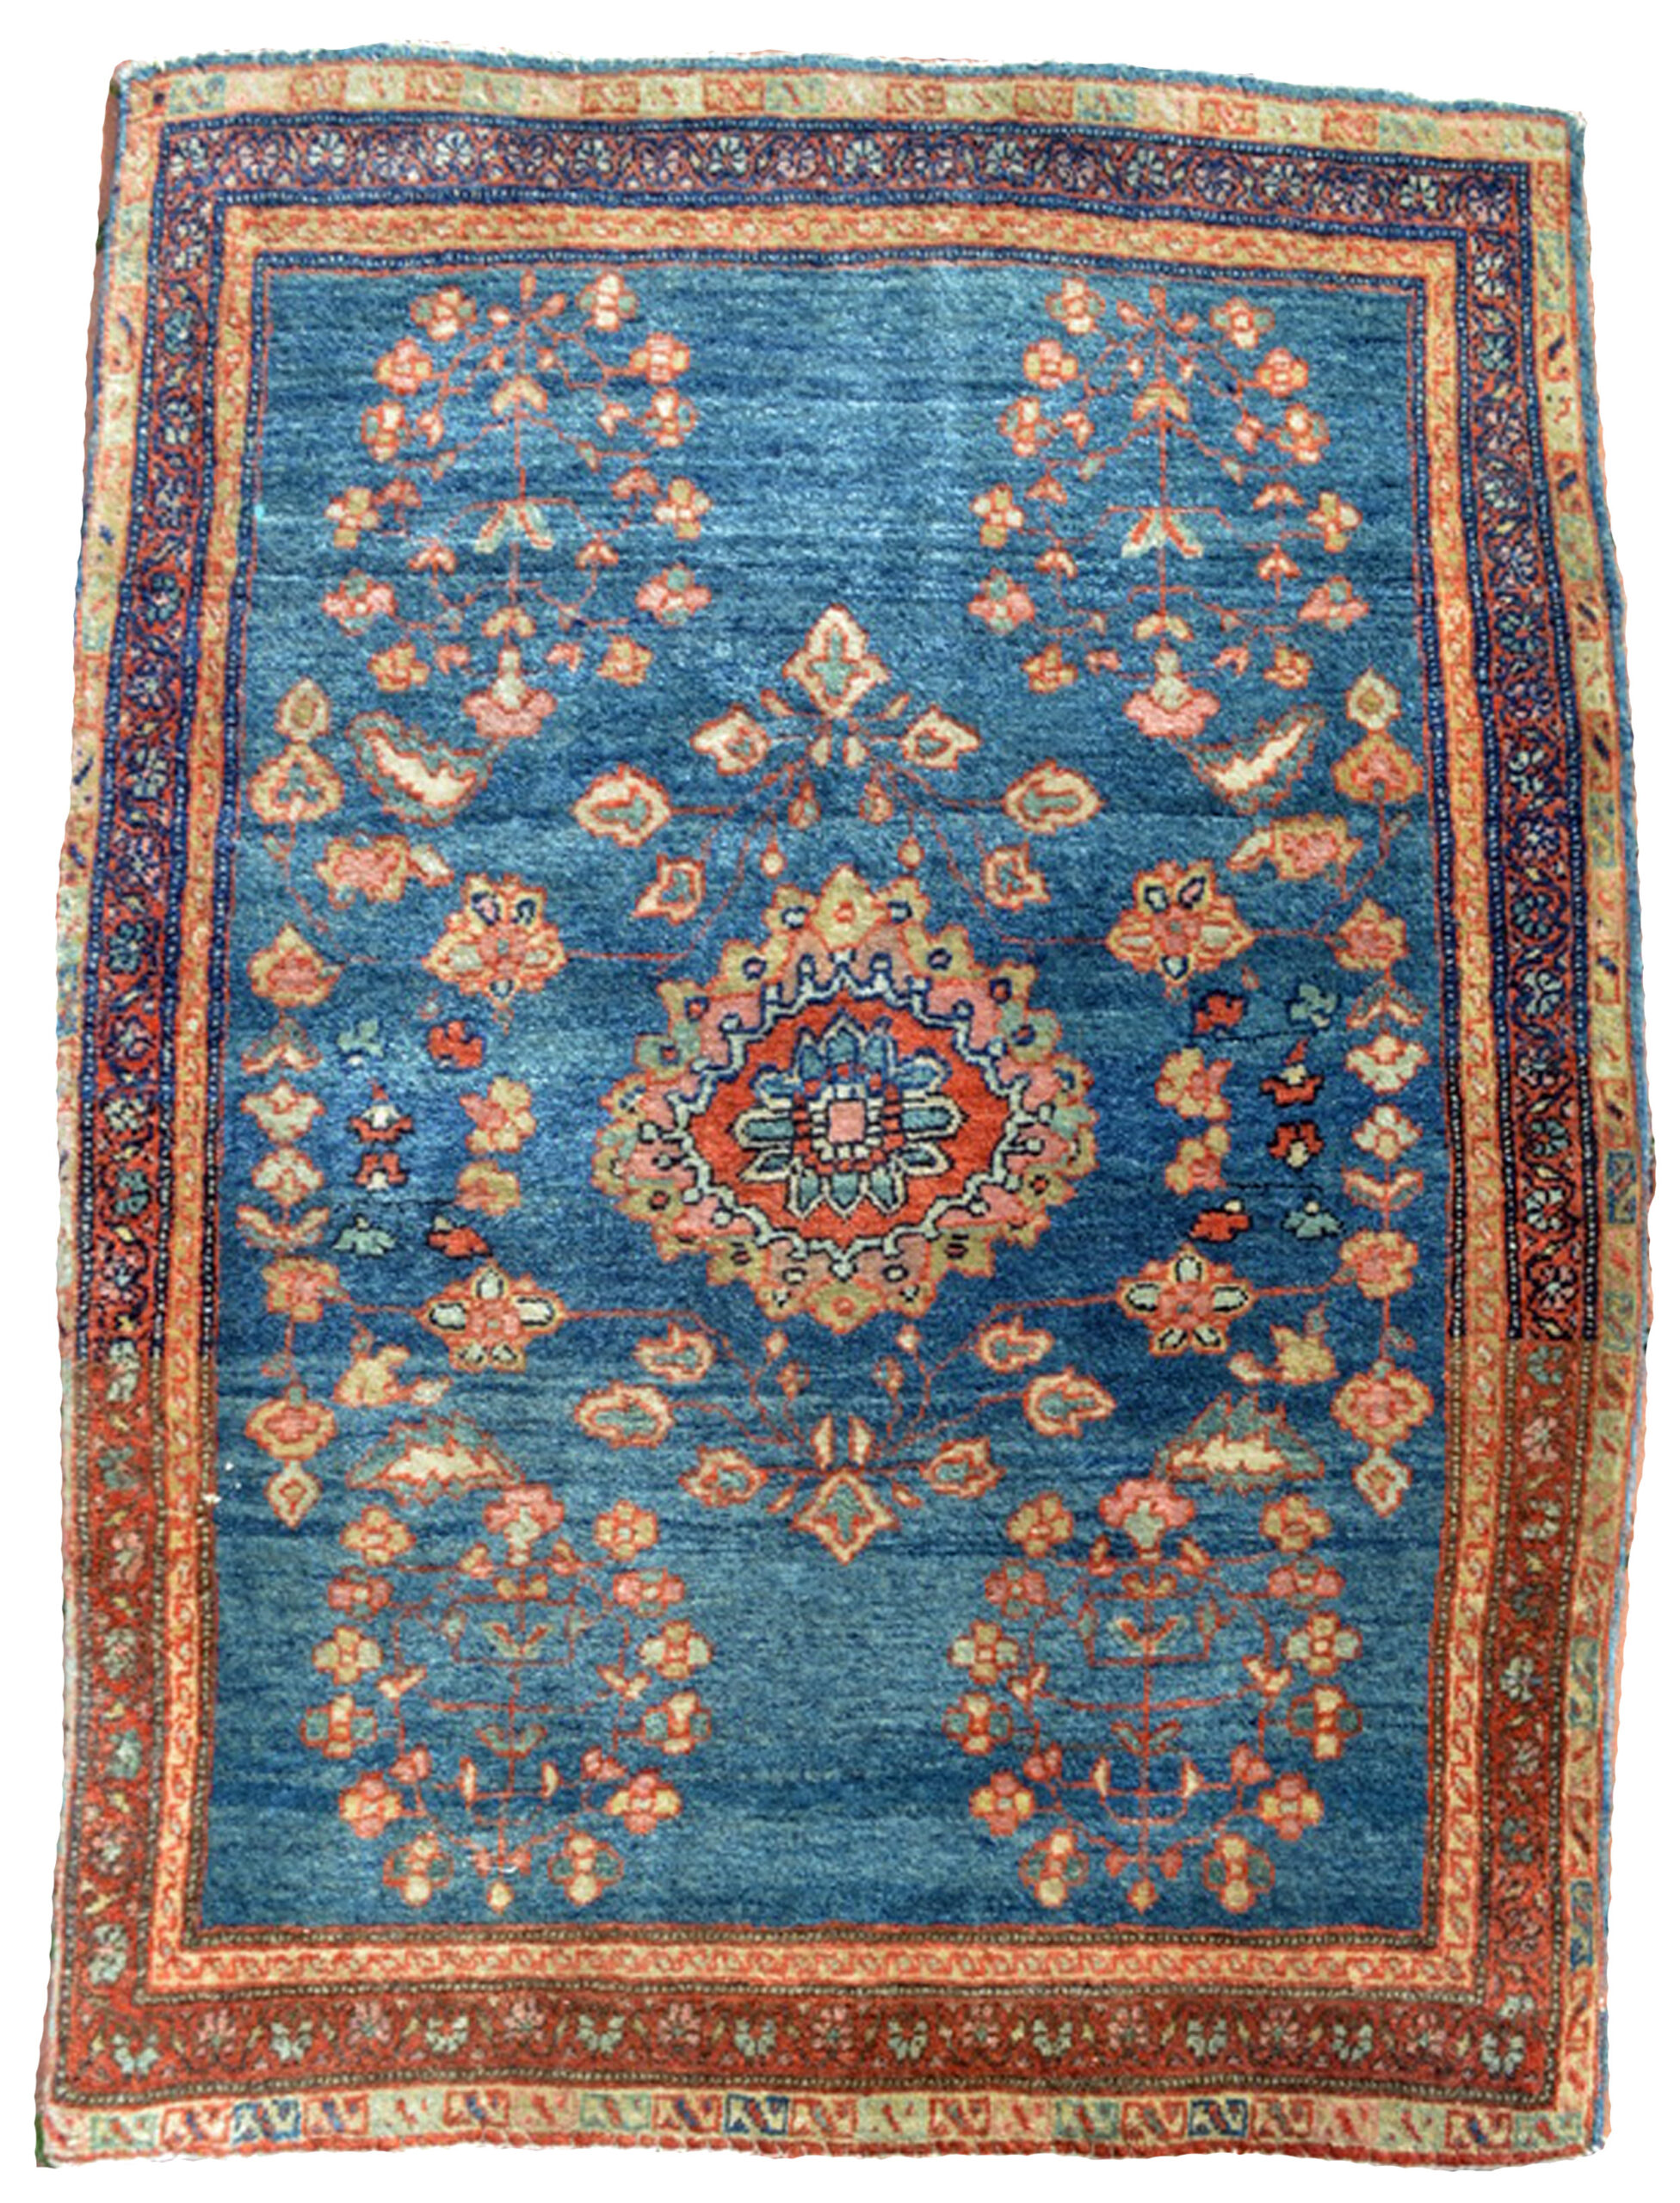 A small antique Persian Fereghan Sarouk rug with a floral design on a denim blue field, circa 1900 - Douglas Stock Gallery, antique Persian rugs, Boston,MA area, New England antique rugs